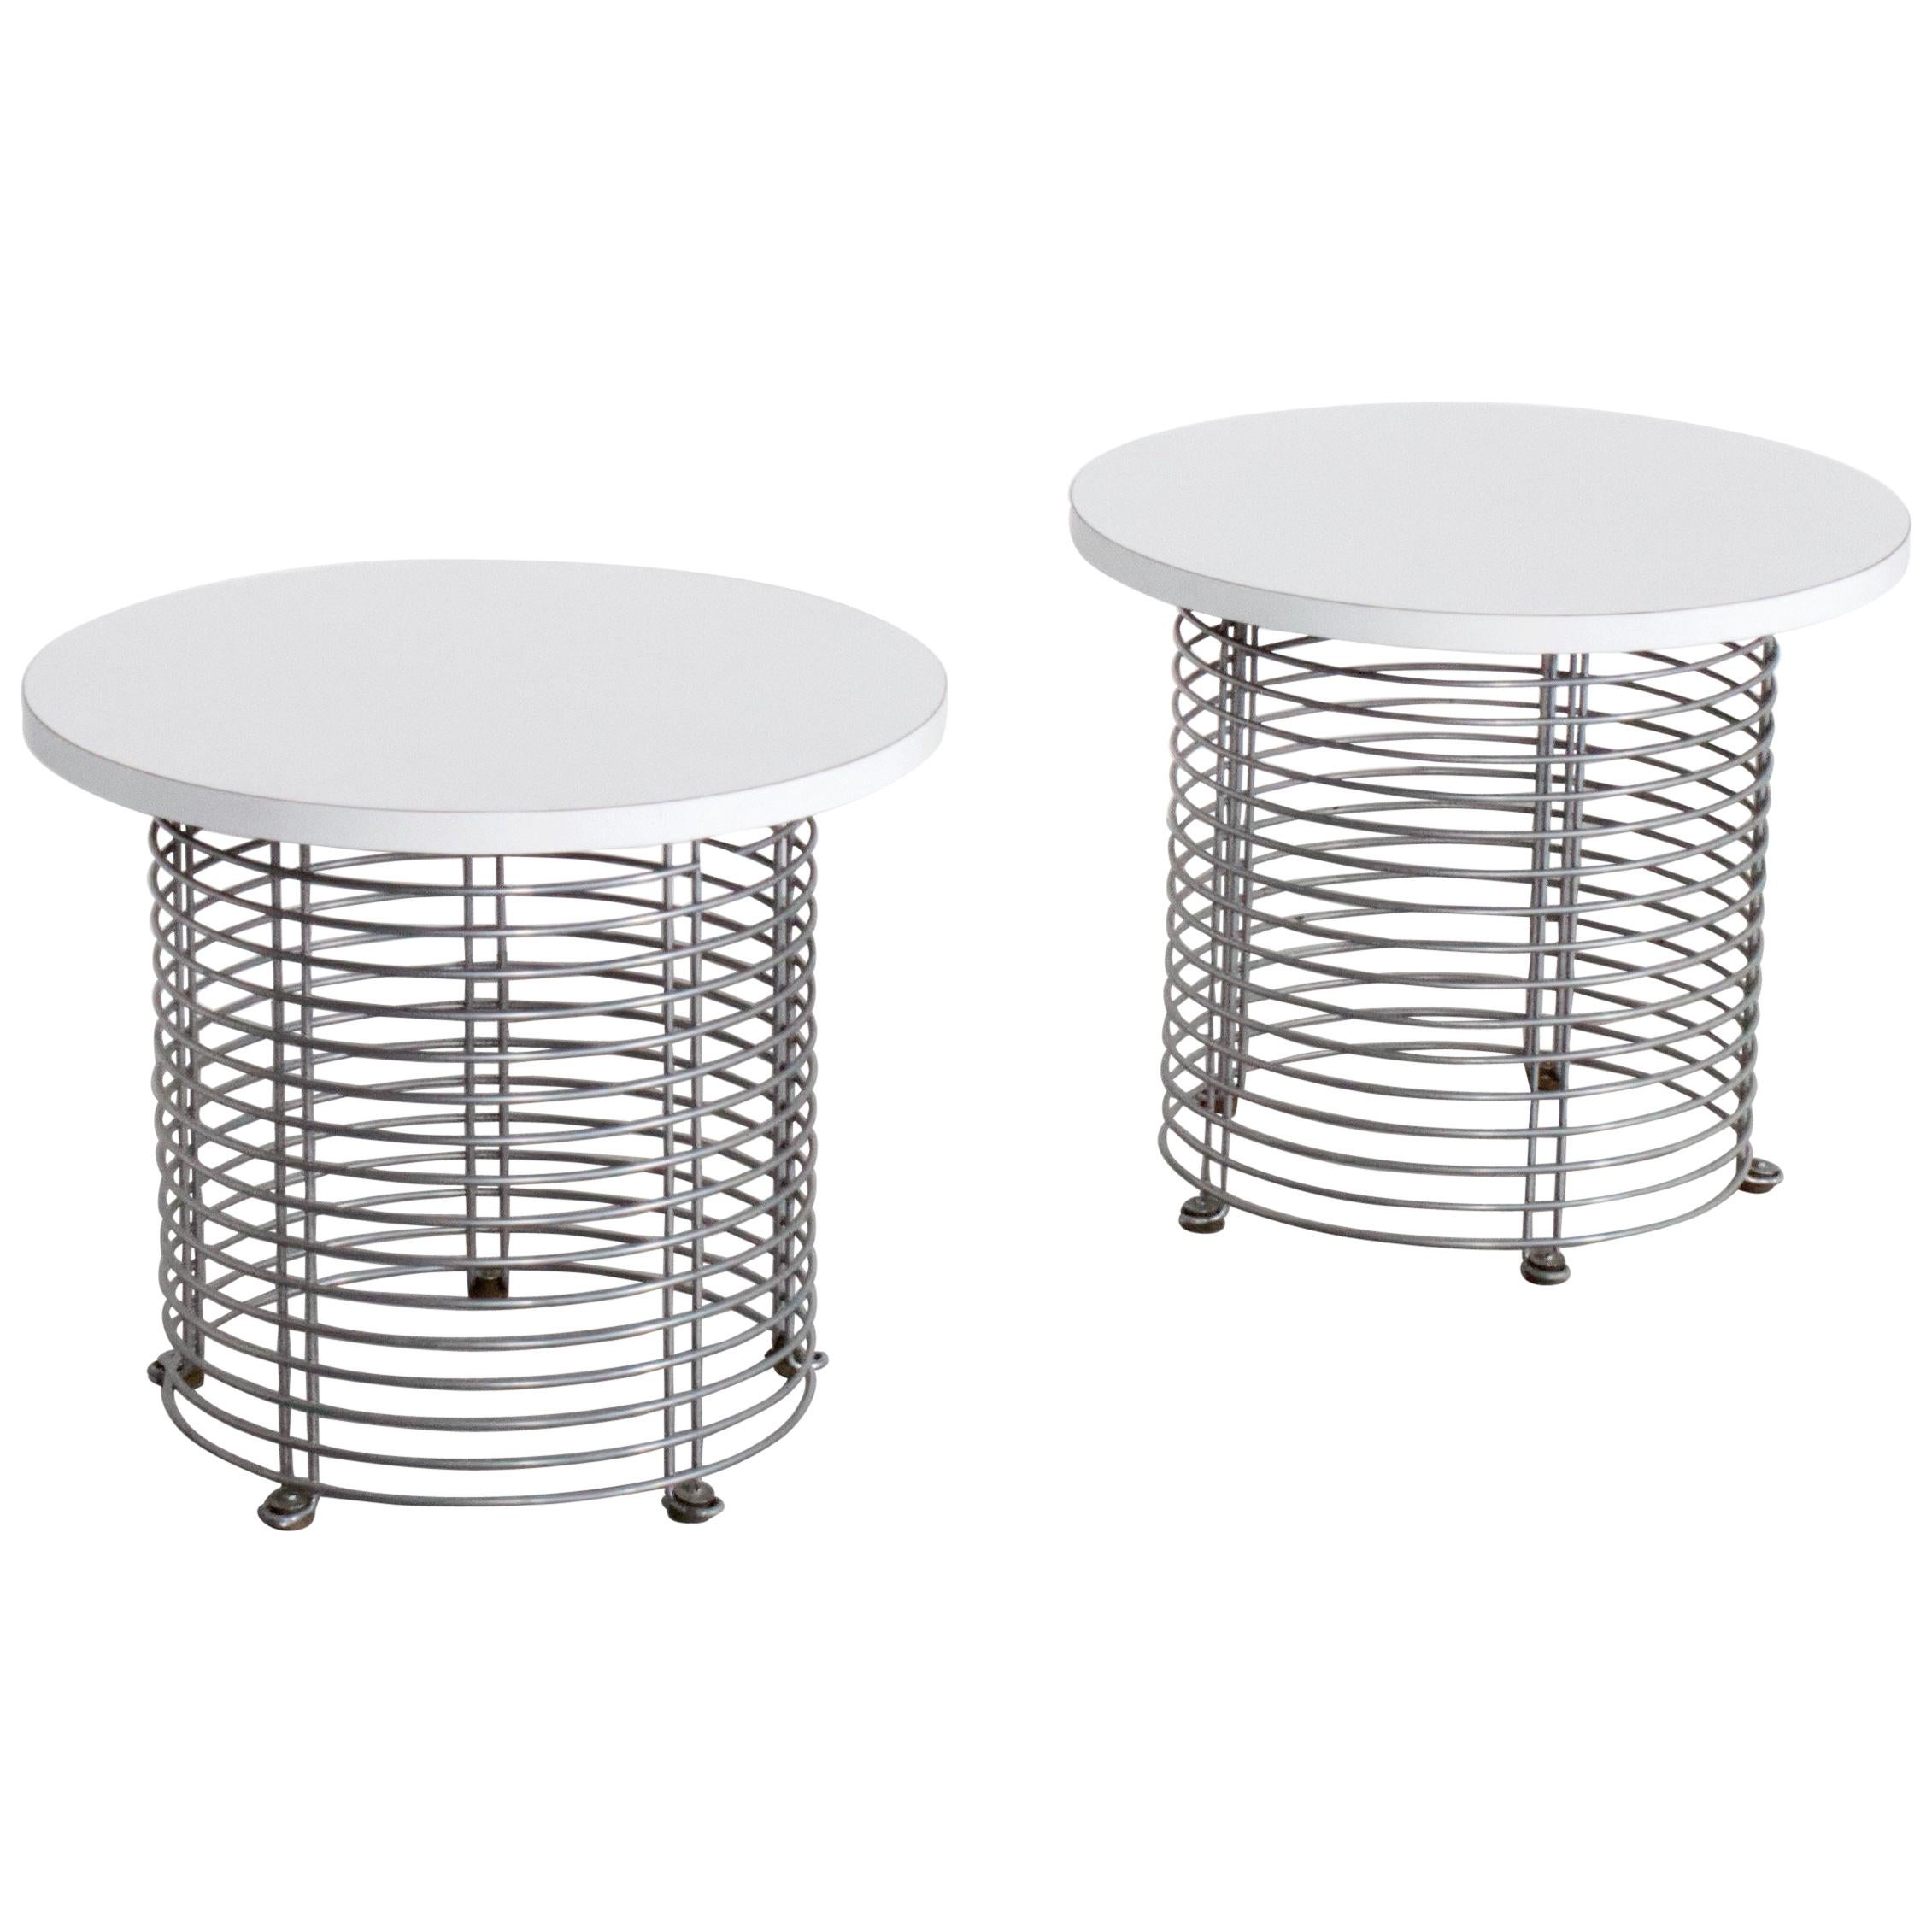 Set of Two ‘Pantonova’ Wire Tables by Verner Panton for Fritz Hansen, 1971